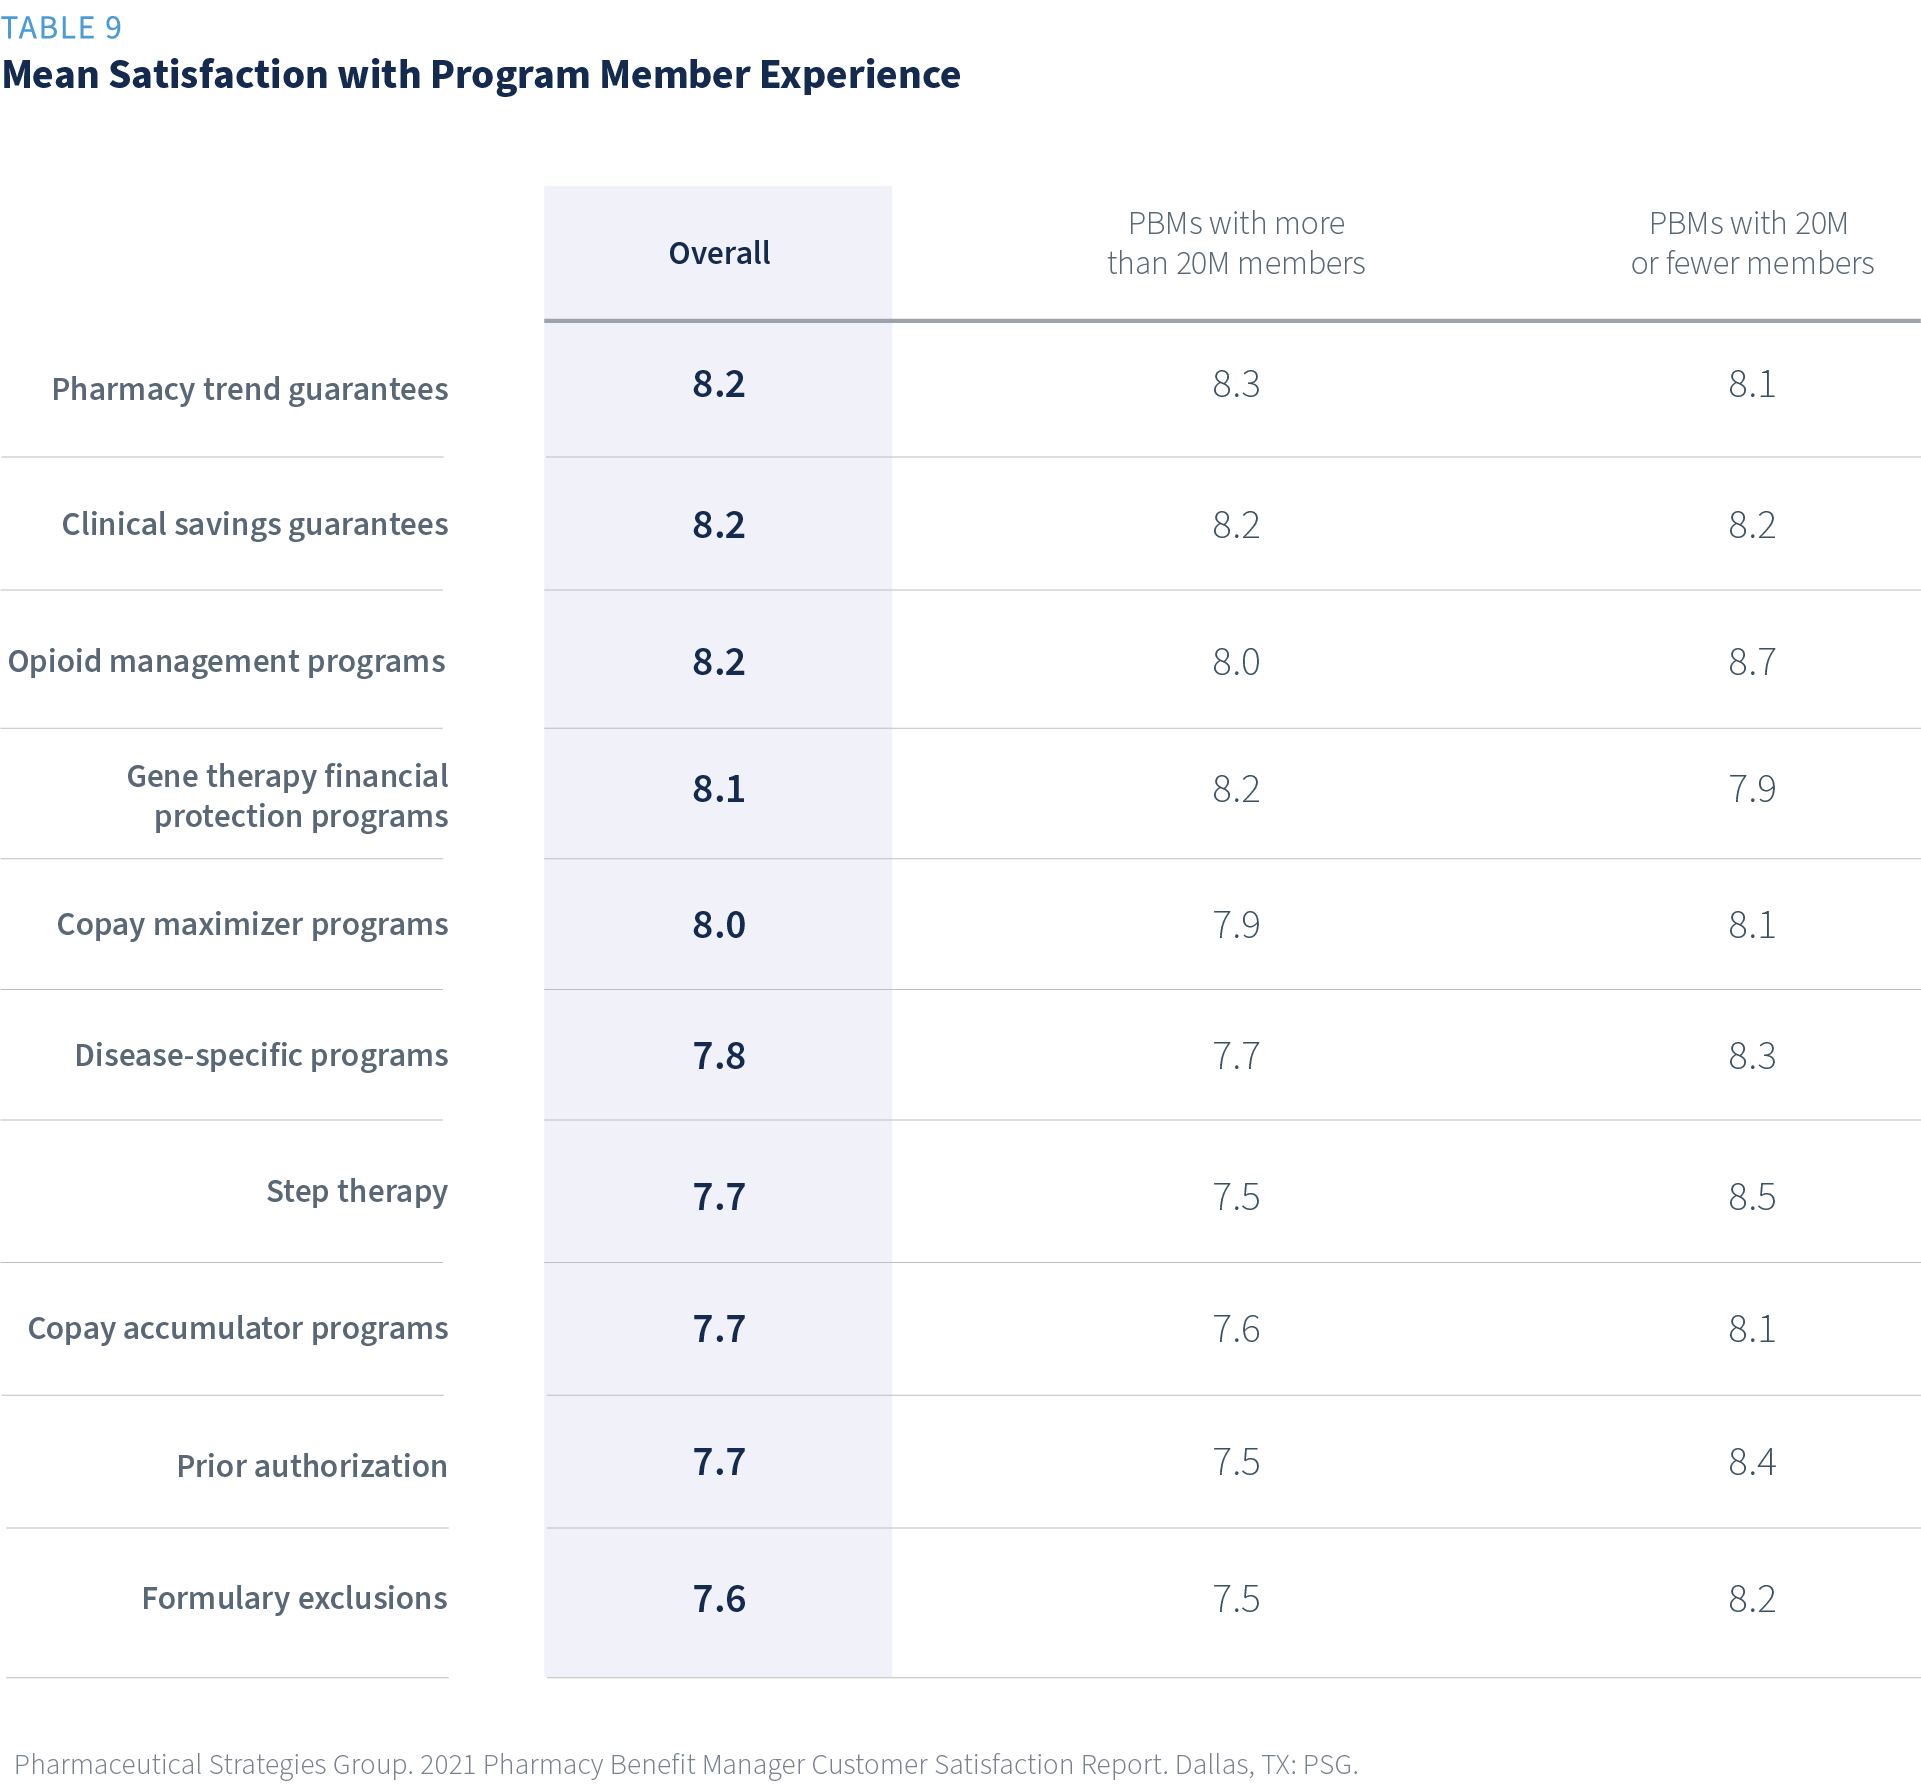 Mean satisfaction with program member experience survey results